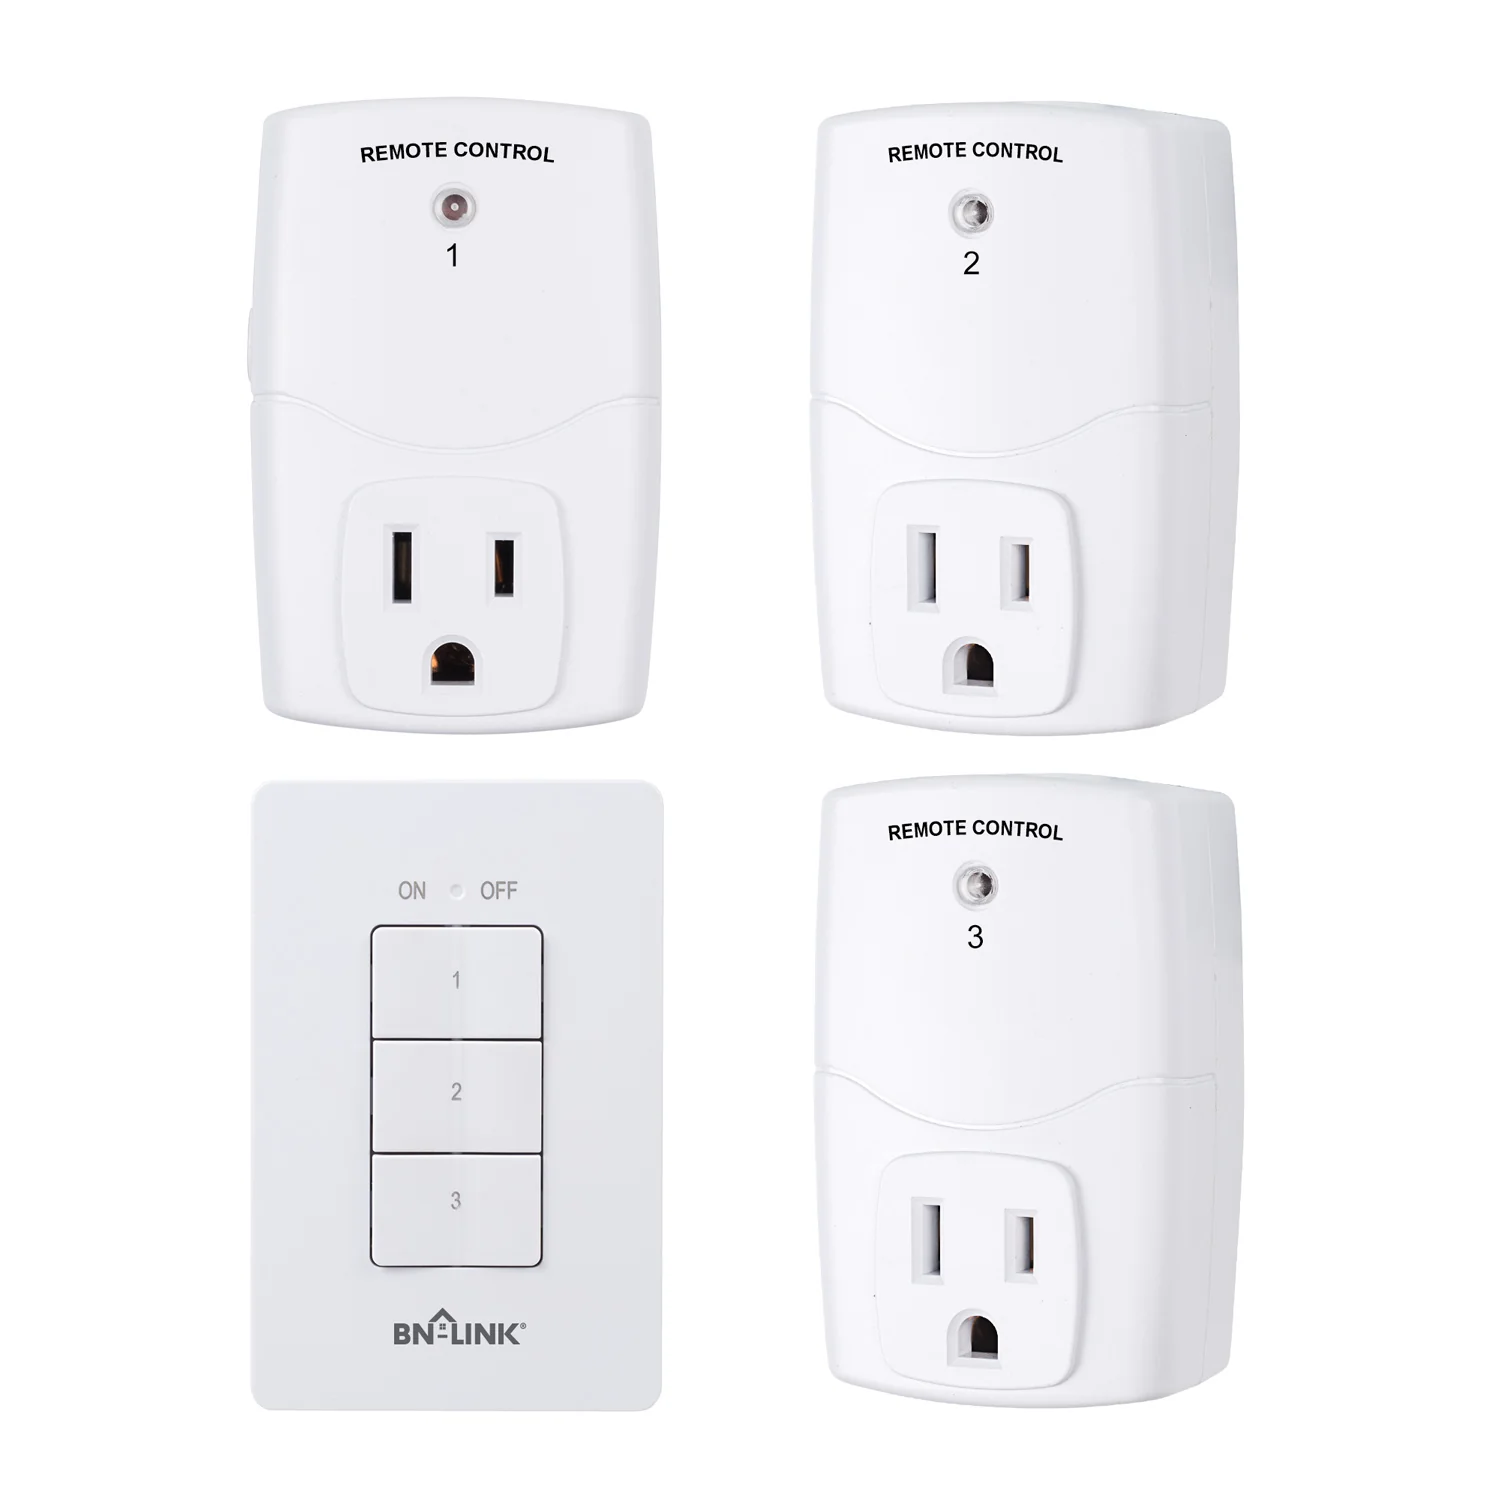 BN-LINK Can Help You Simplify Your Home: Presenting the Mini Wireless Wall-Mounting Remote Control Outlet with Three Outlets